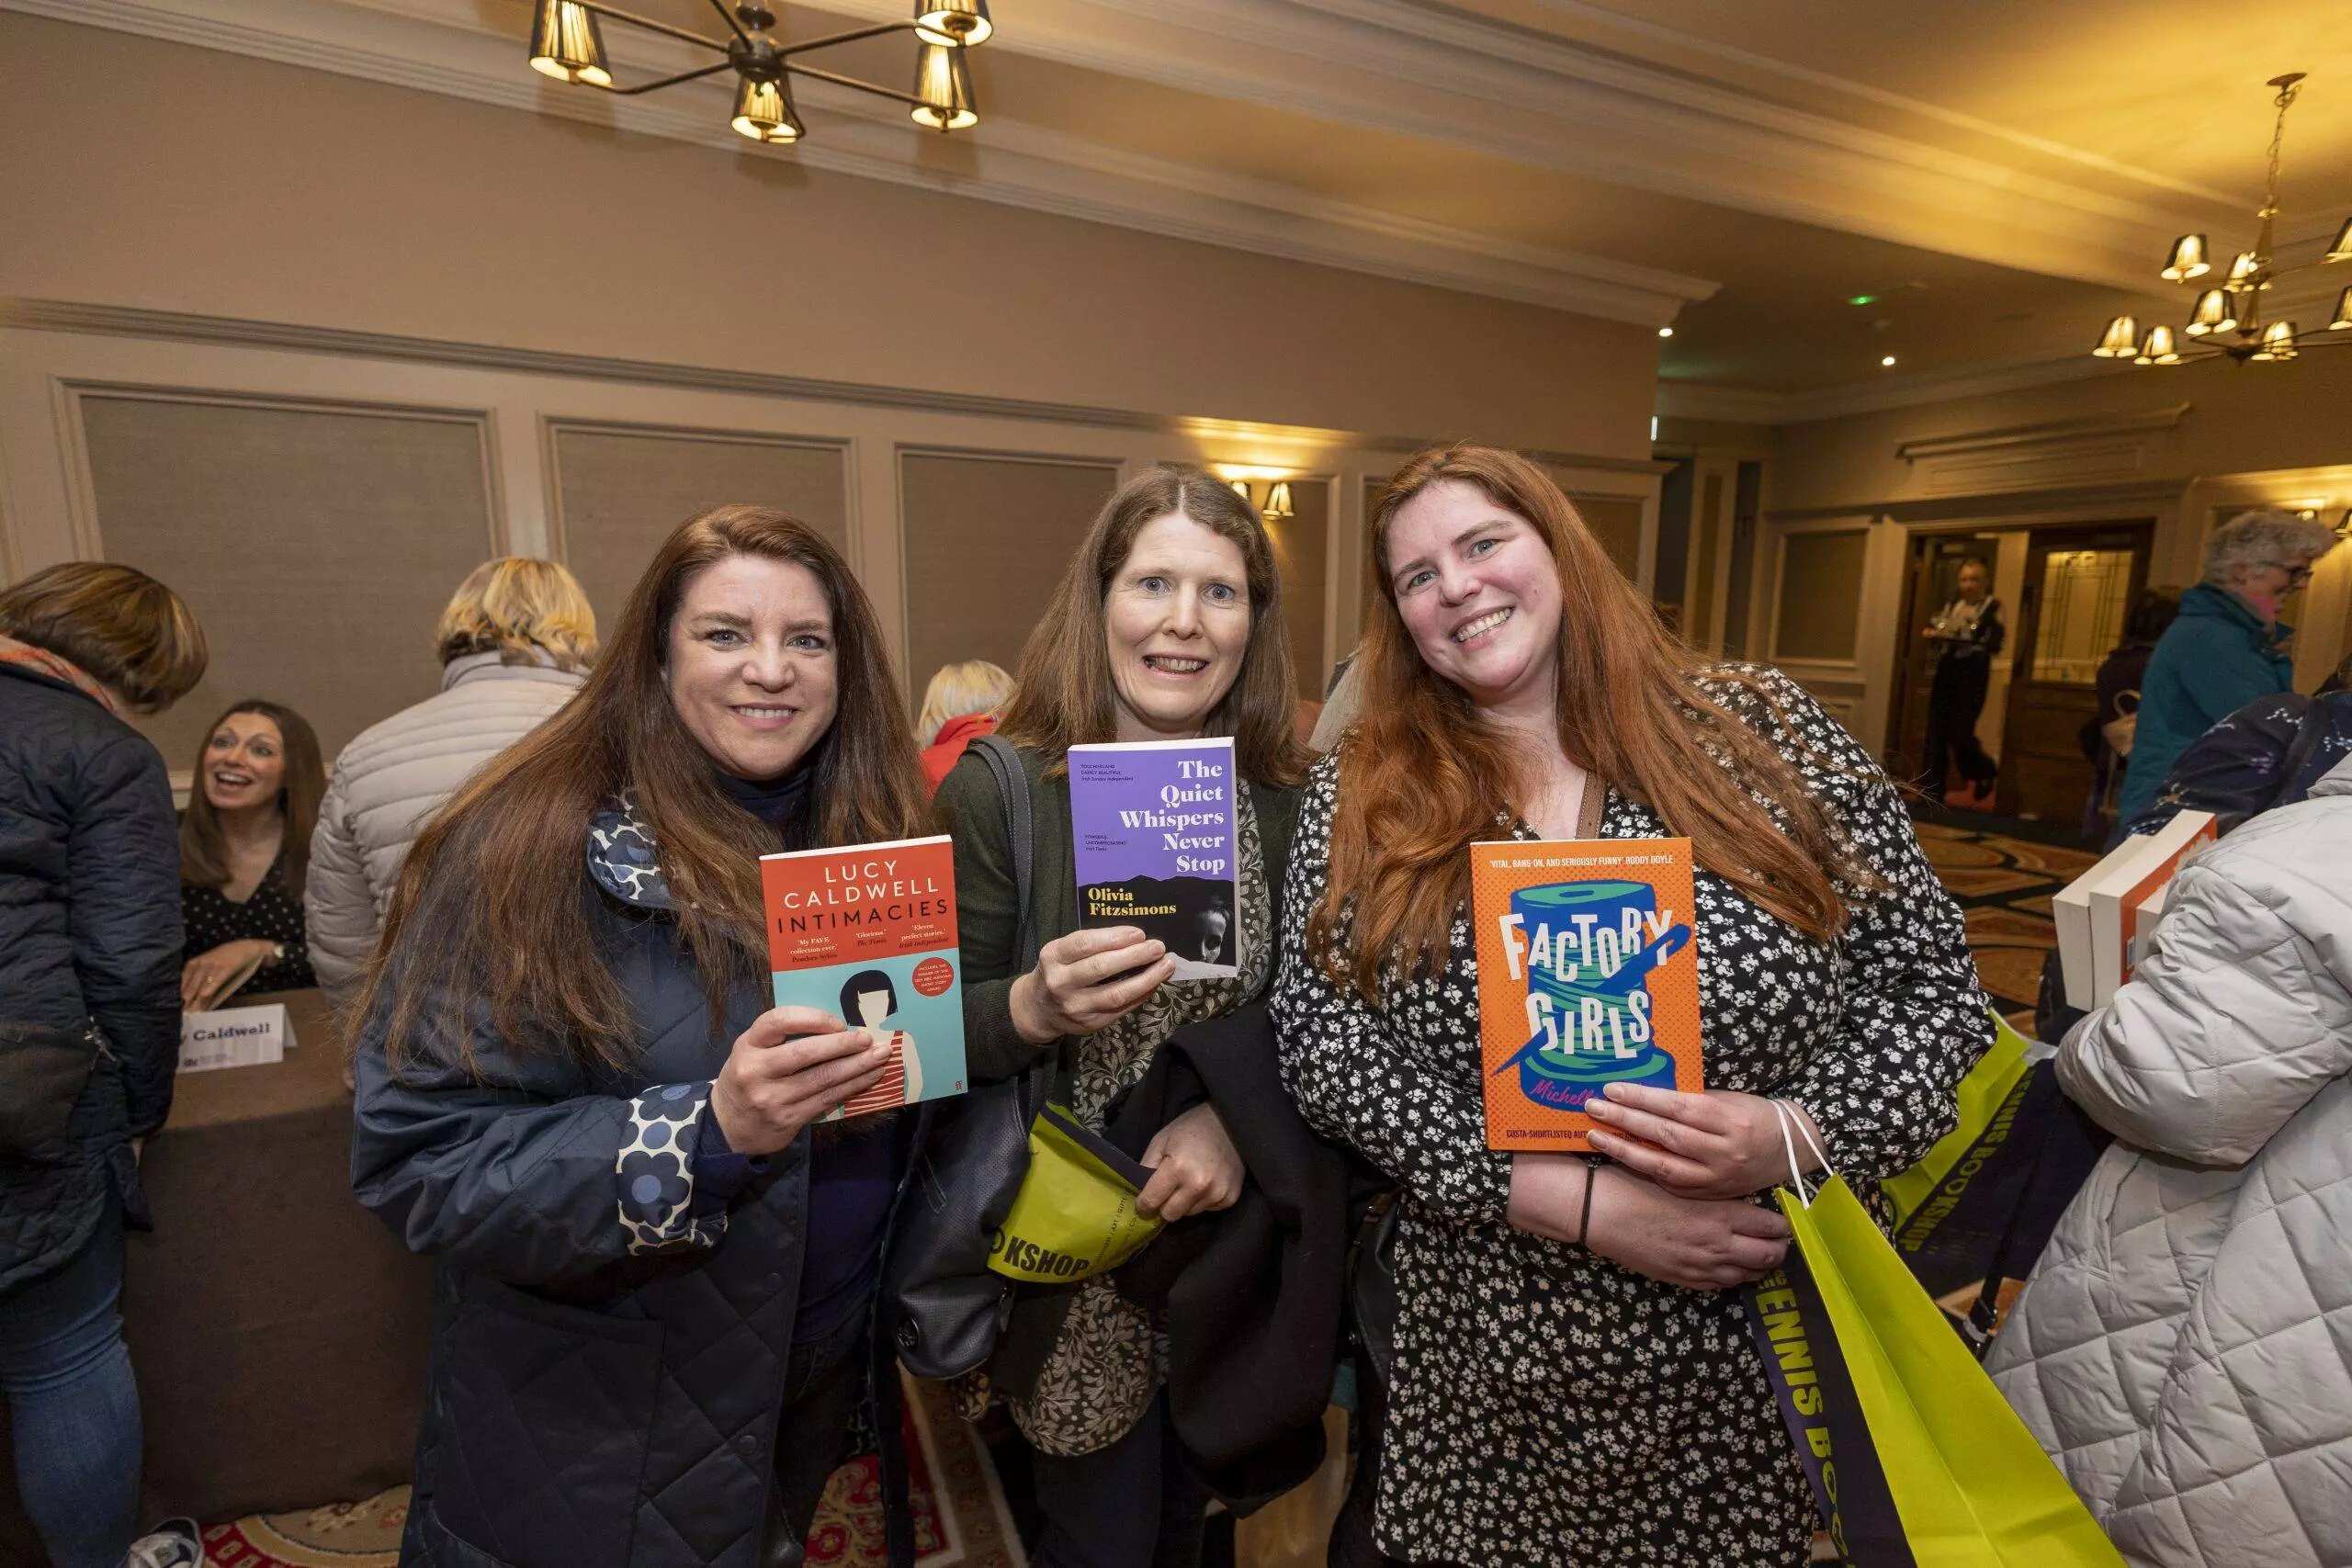 8-facts-about-ennis-book-club-festival